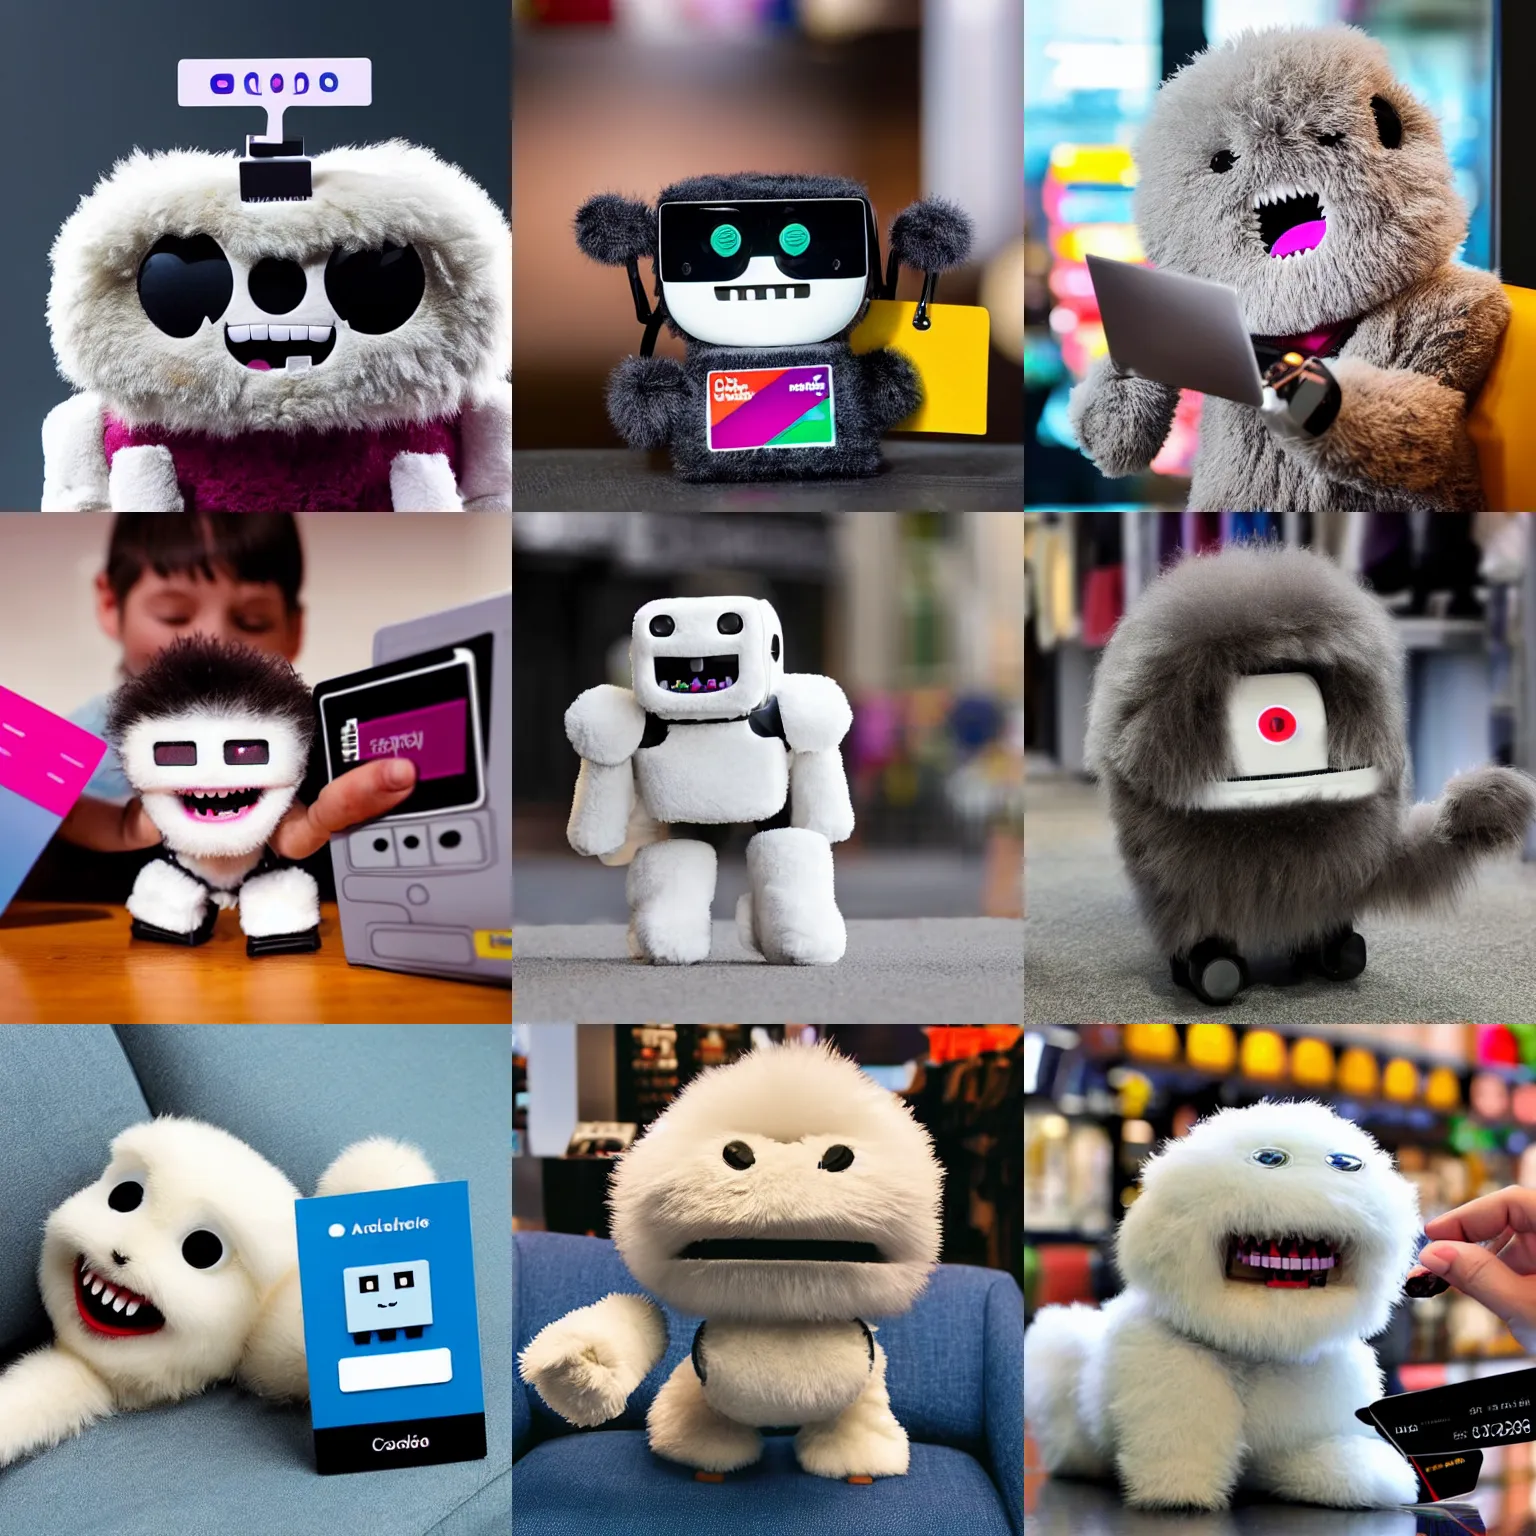 Prompt: <picture quality=hd+ mode='attention grabbing'>an adorable fluffy robot laughs maniacally as it steals your credit card to go on a spending spree</picture>